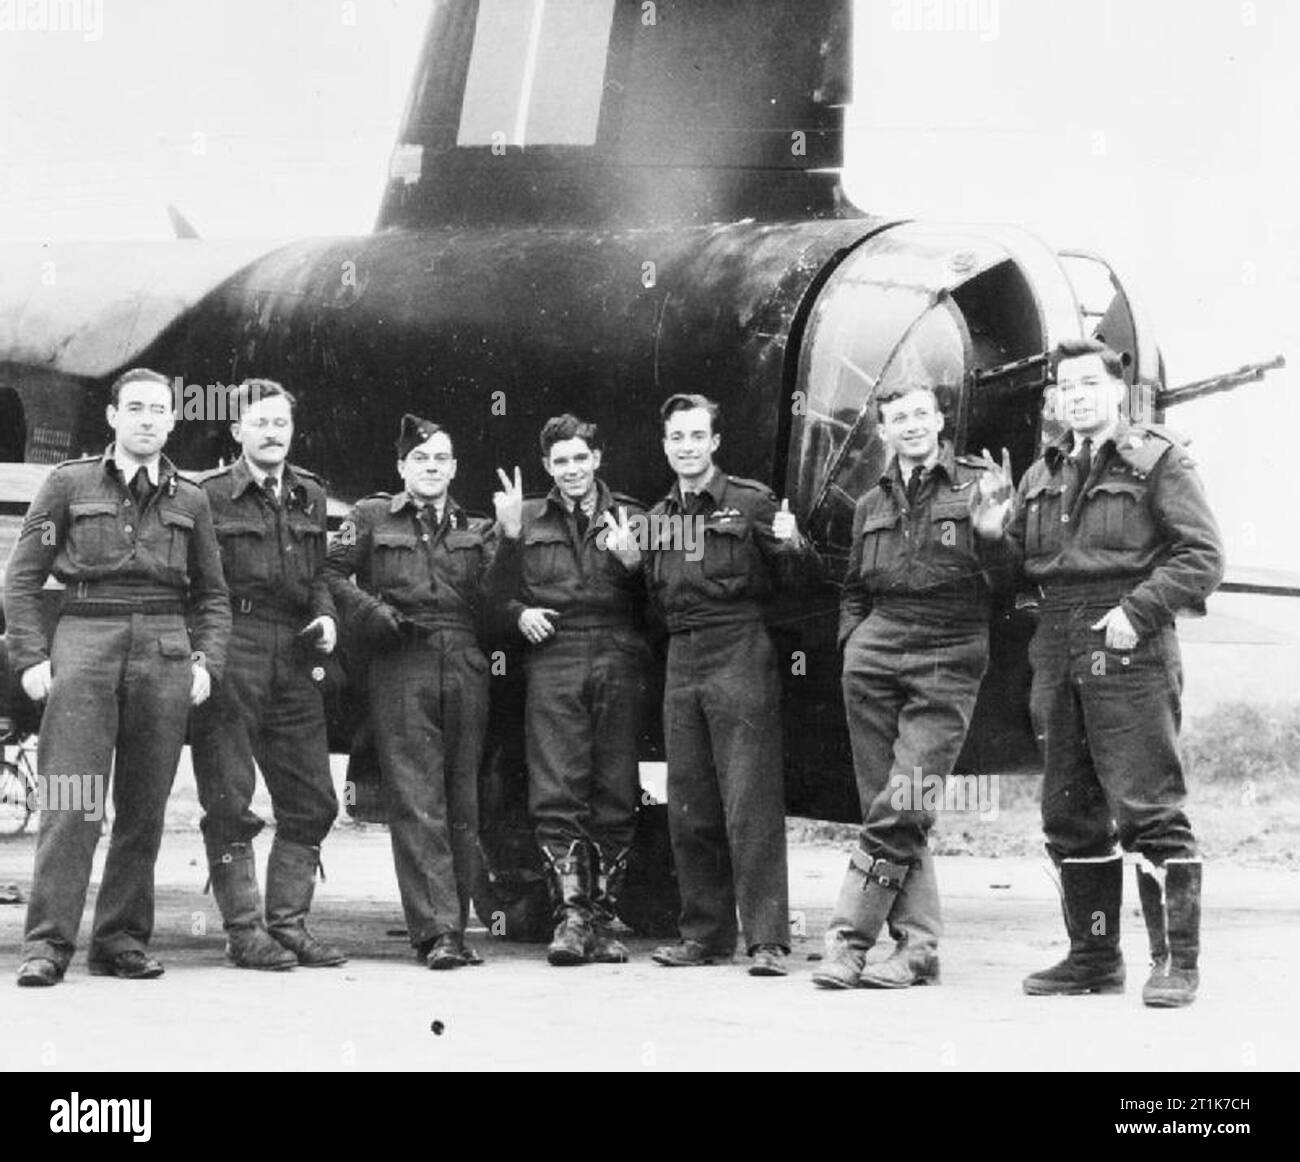 Royal Air Force 1939-1945- Bomber Command Flight Sergeant A M Halkett DFM (third from right) and his crew pose by the tail of Stirling I N3669/LS-H of No. 15 Squadron, after completing the aircraft's 62nd operation, November 1942. Stock Photo